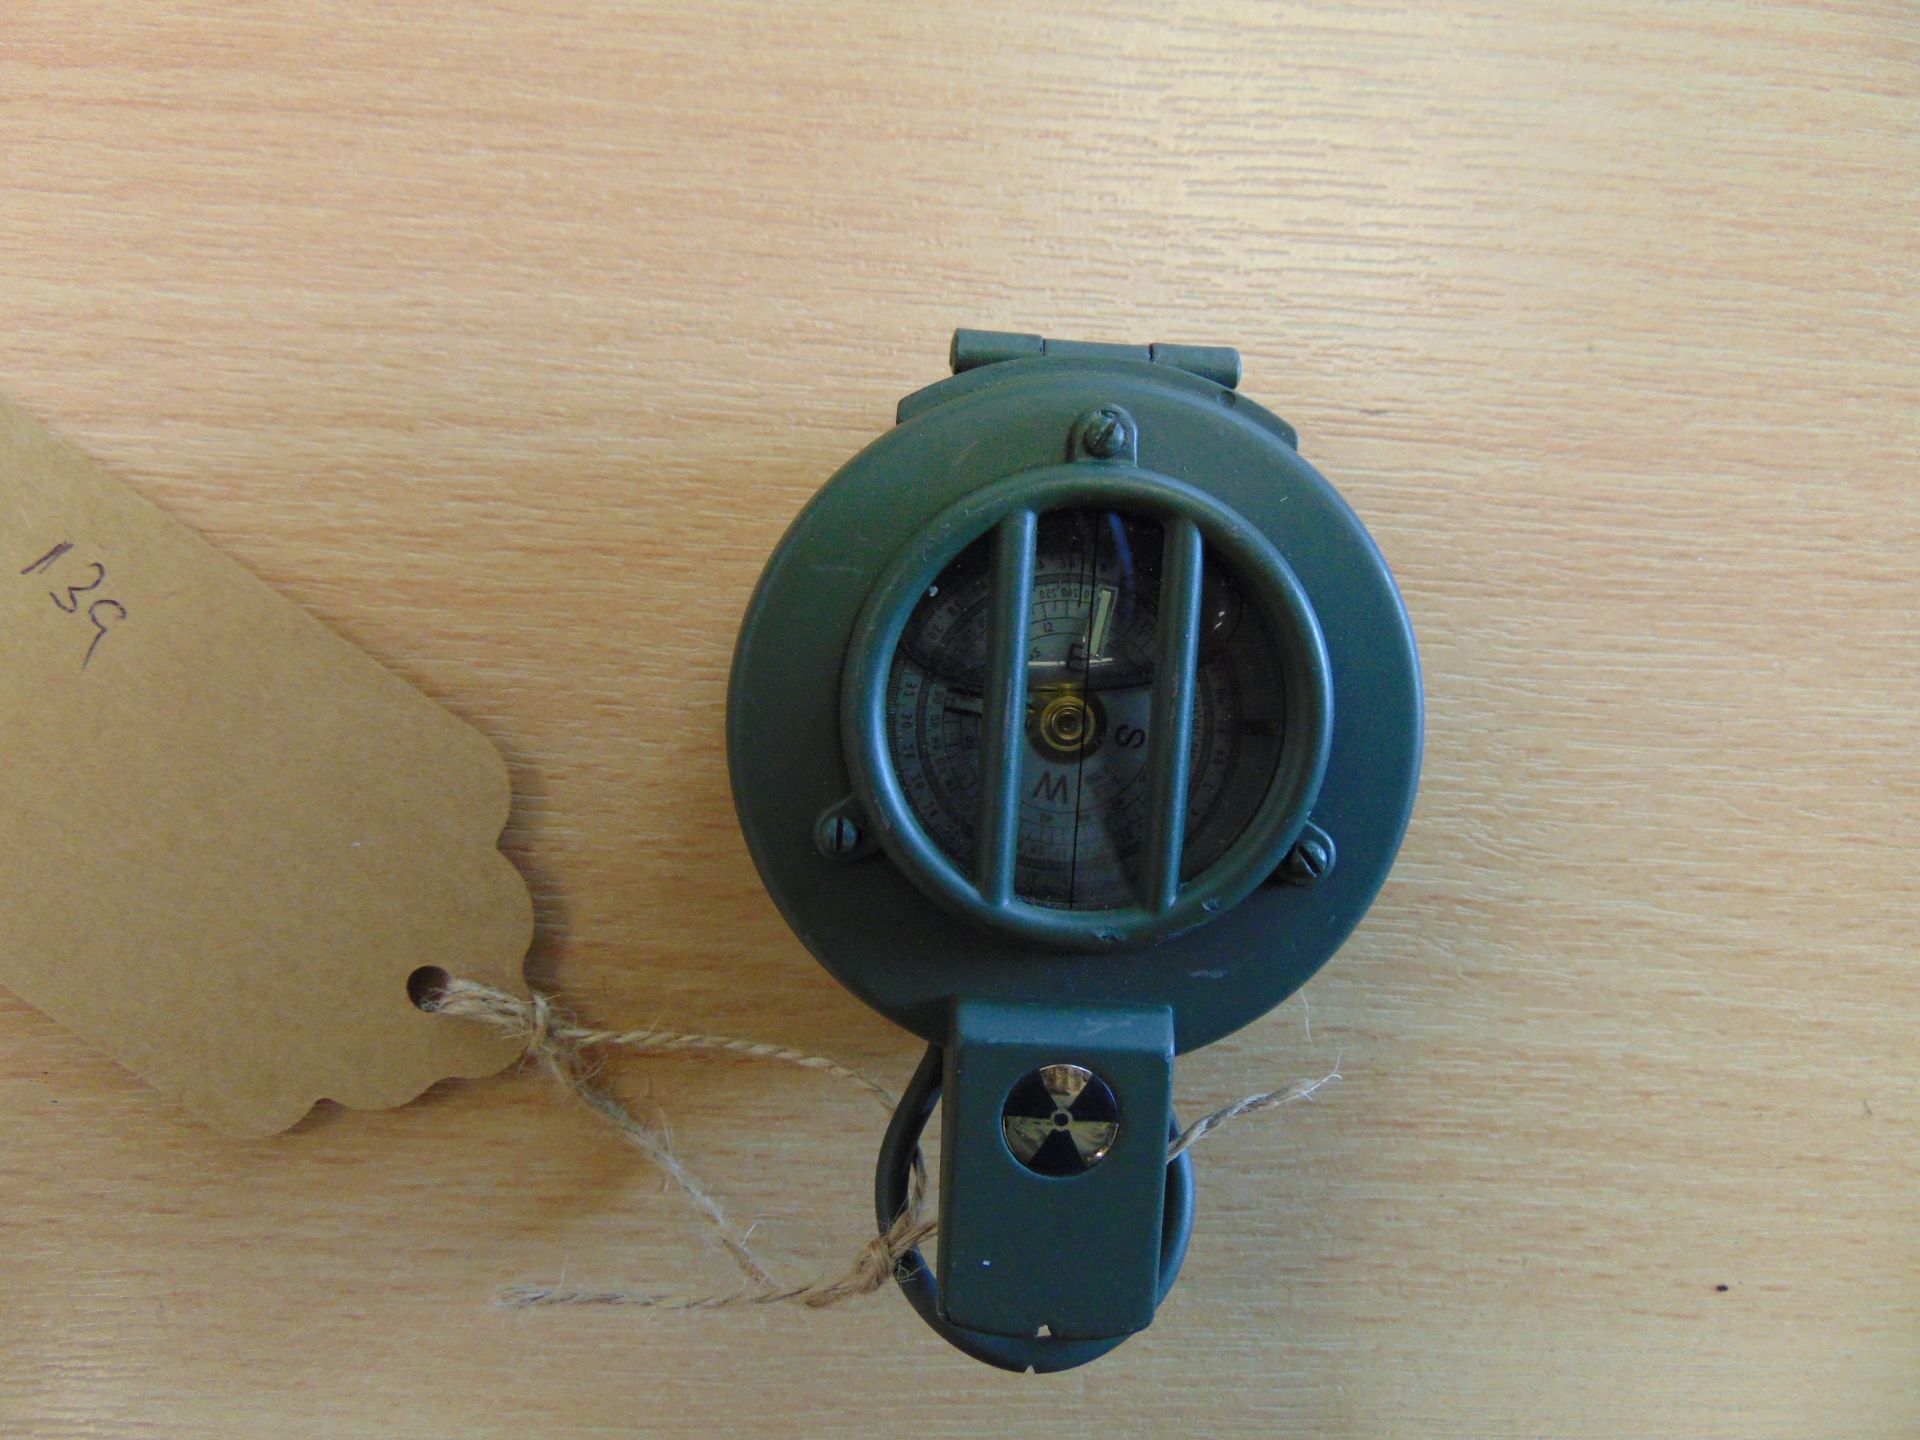 Francis Barker British Army M88 Prismatic Compass in Mils - Image 3 of 3